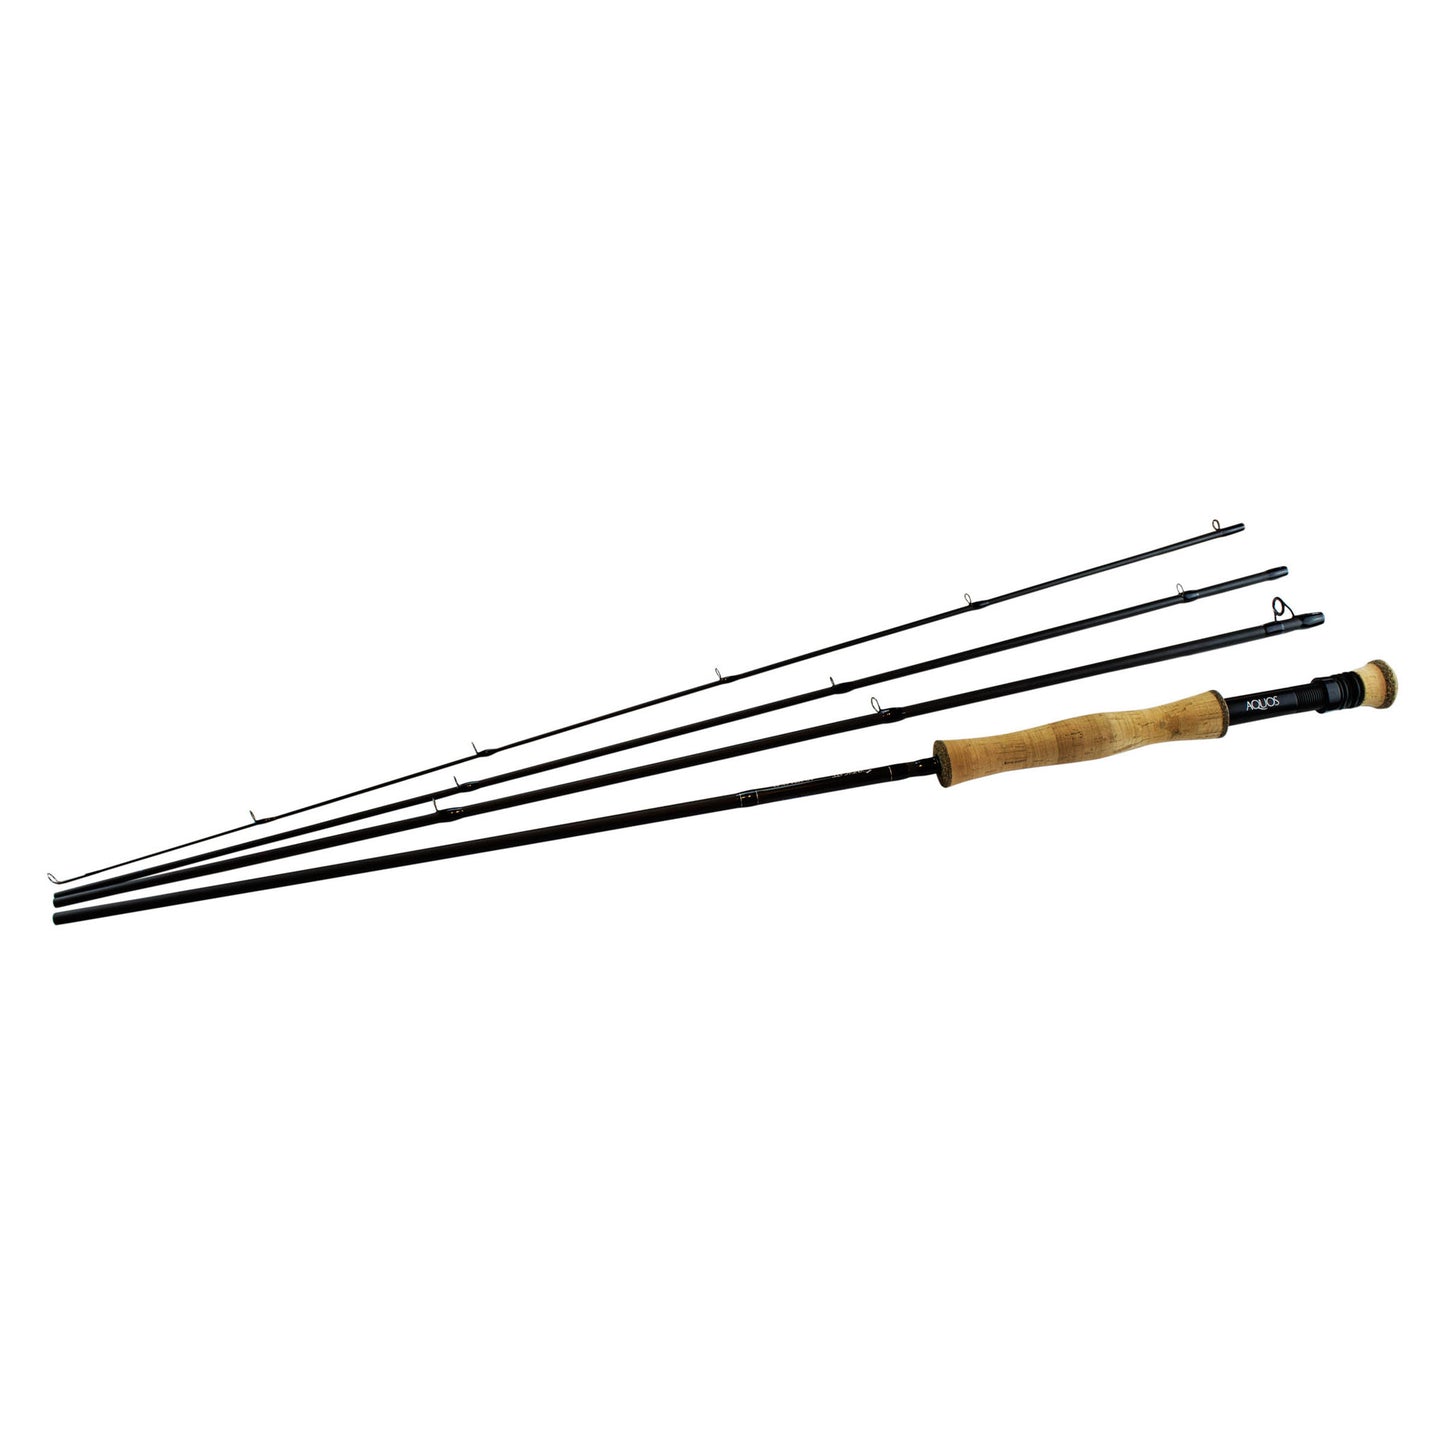 Syndicate AQUOS Fly Rod